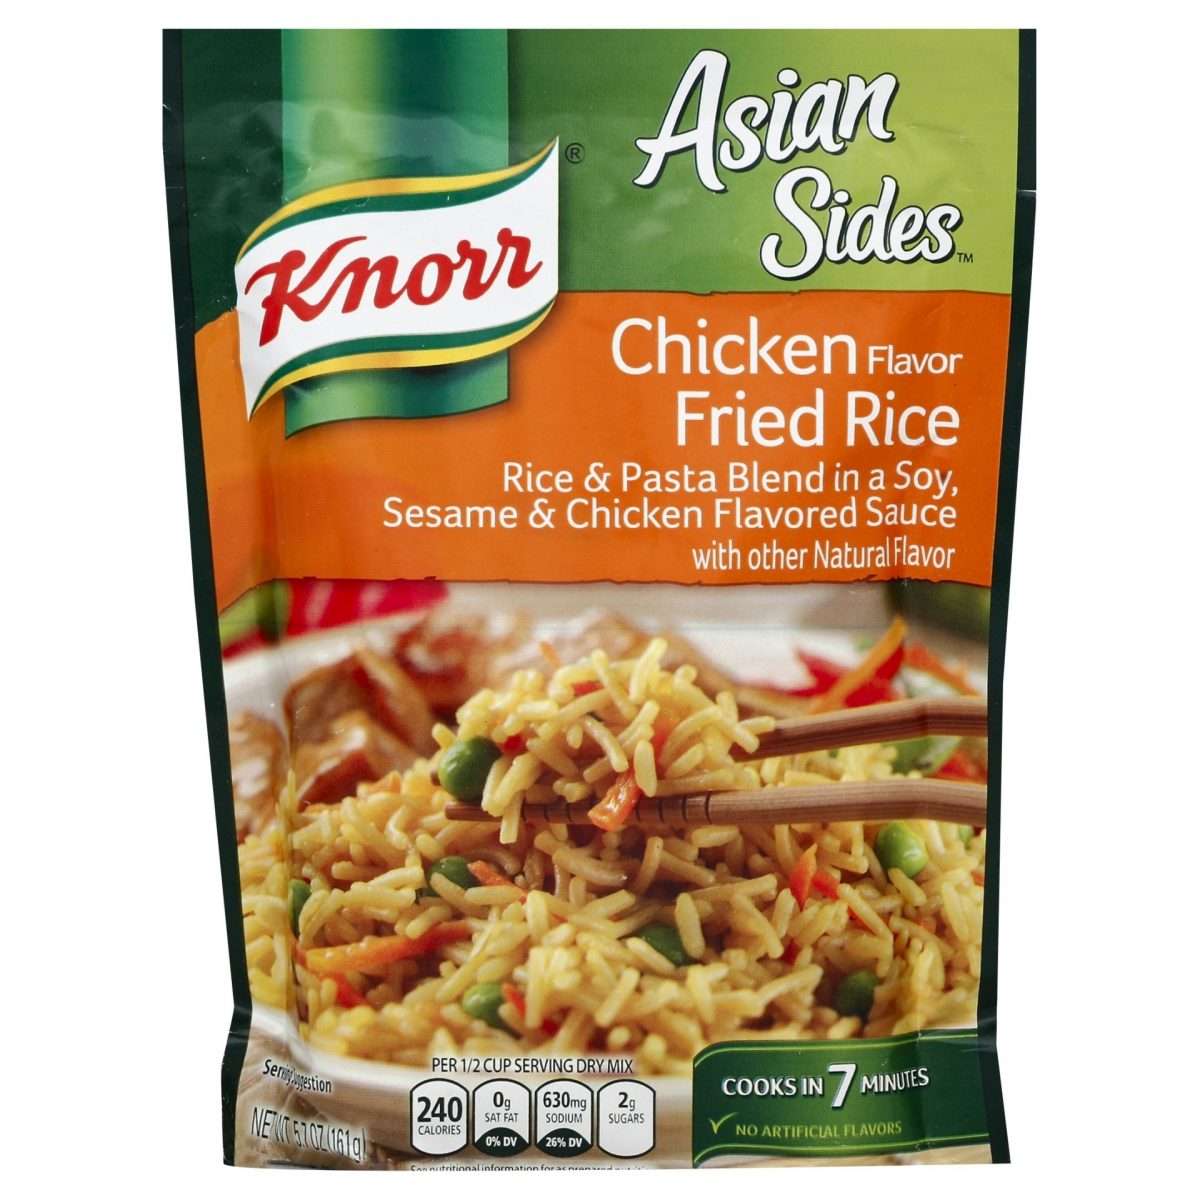 Knorr Asian Sides Chicken Fried Rice 5.7 oz